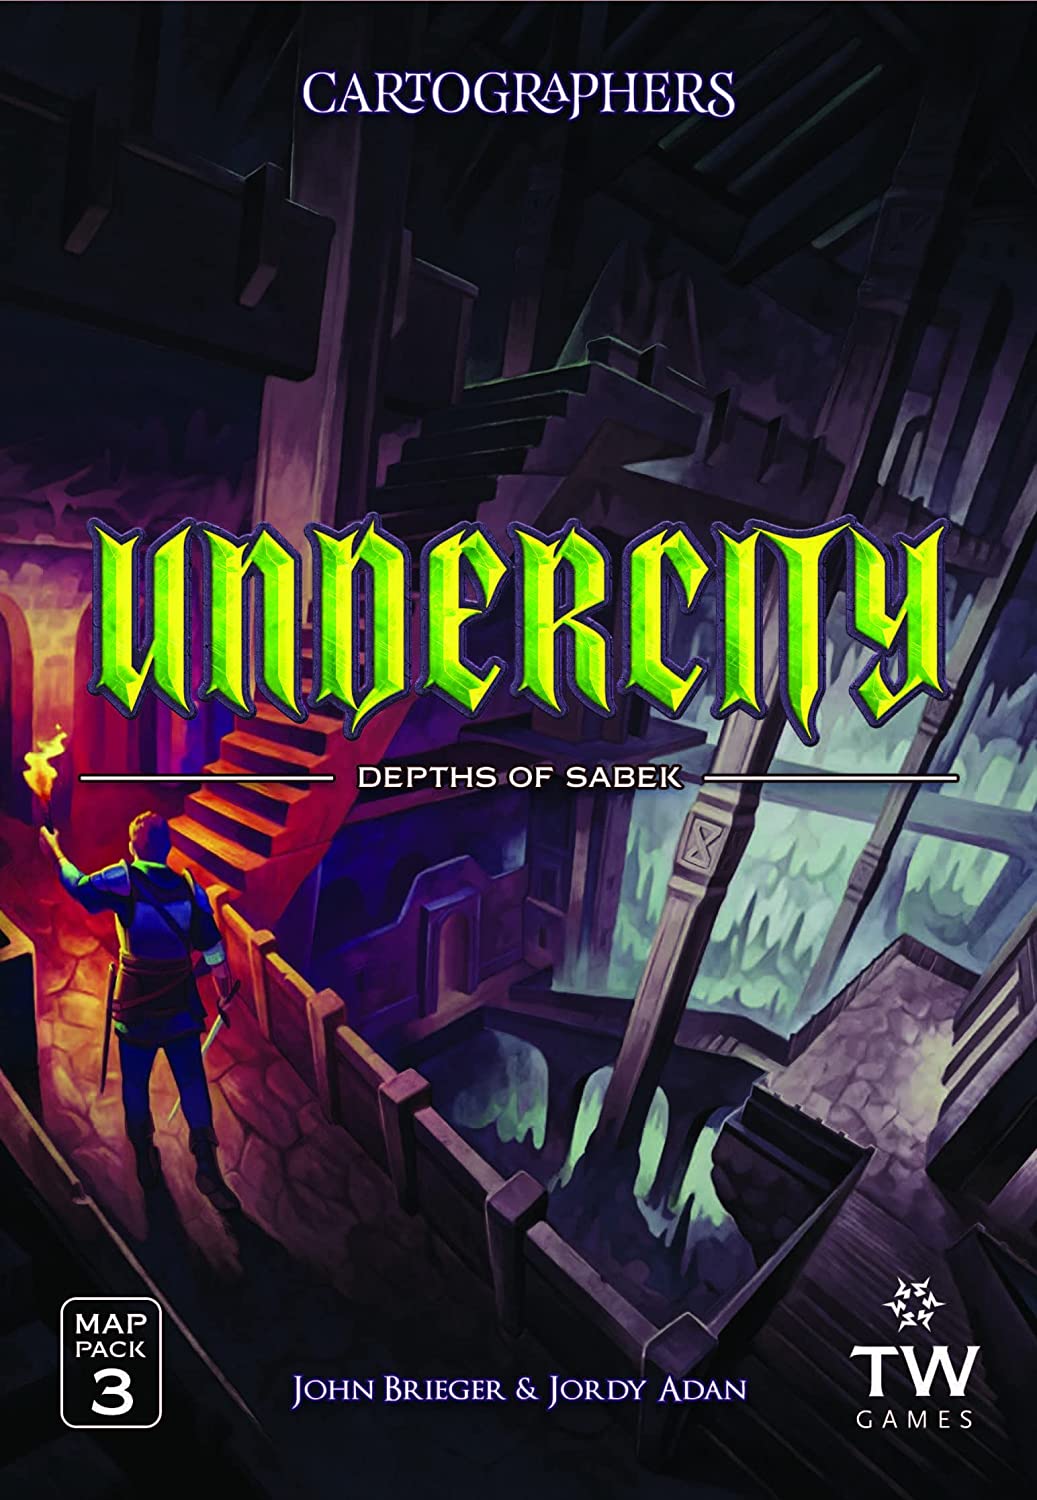 Cartographers Heroes Map Pack 3 - Undercity